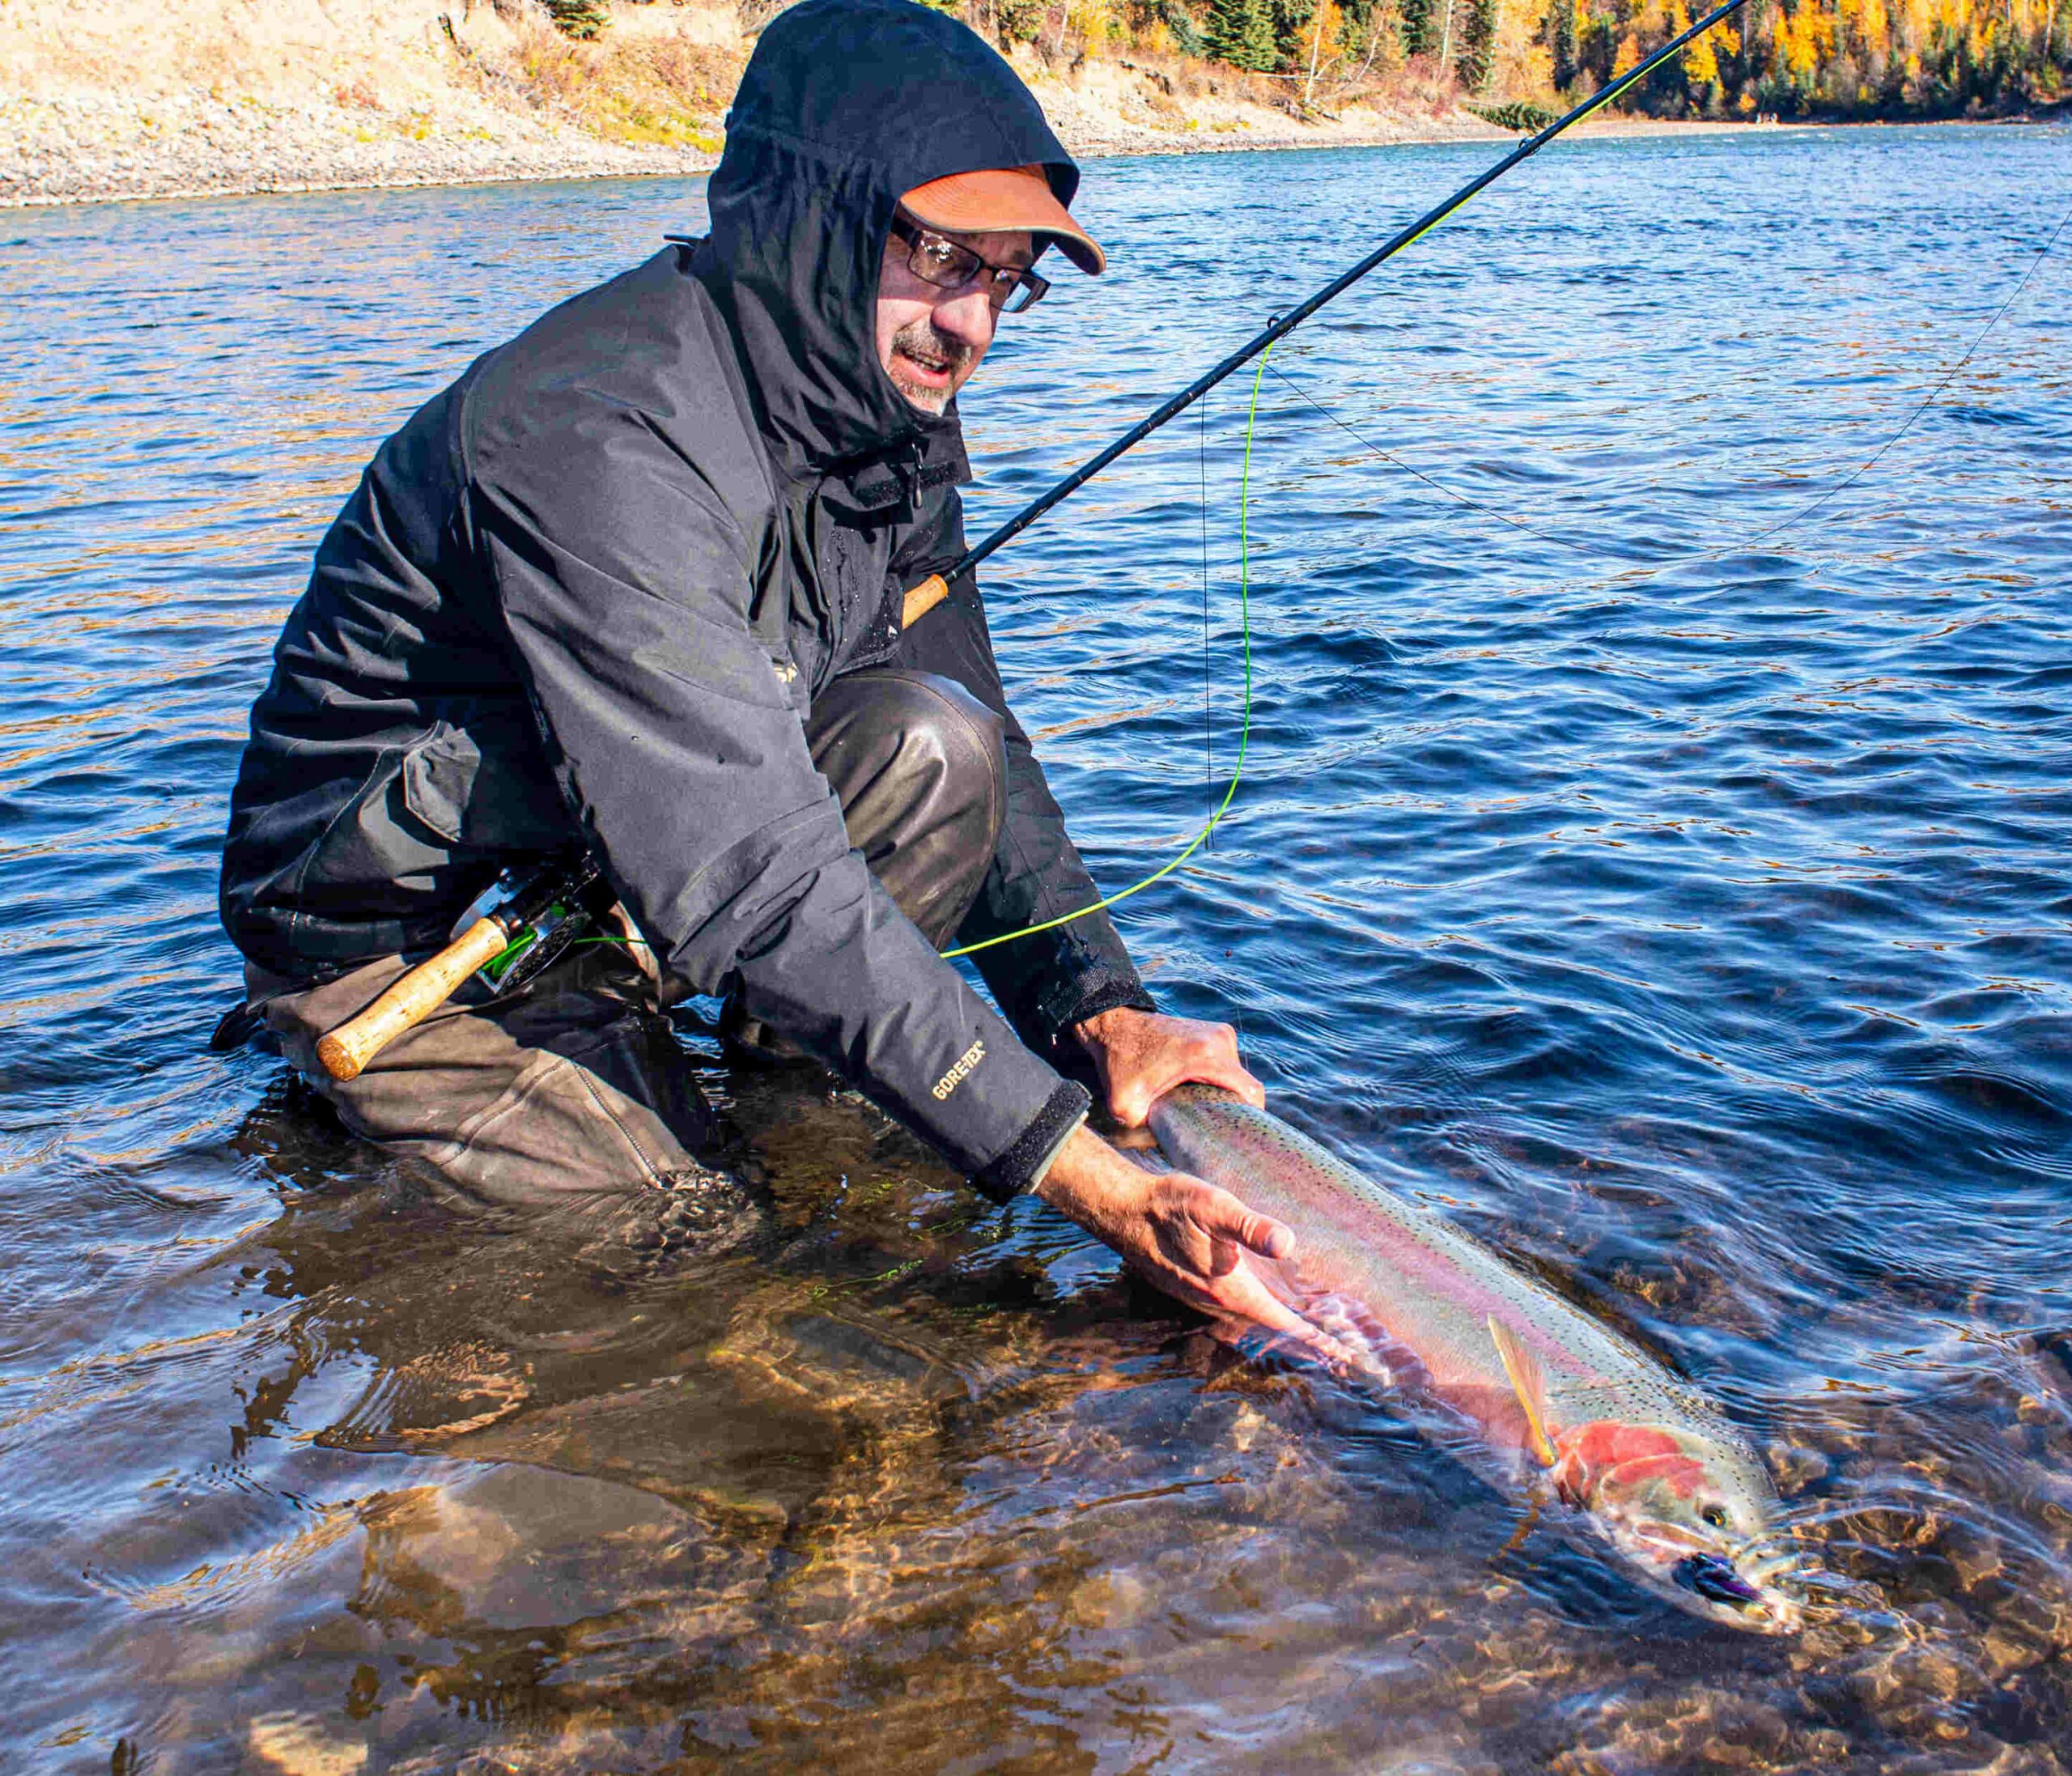 Steelhead Guide: Fly Fishing Techniques and Strategies for Lake Erie Steelhead [Book]